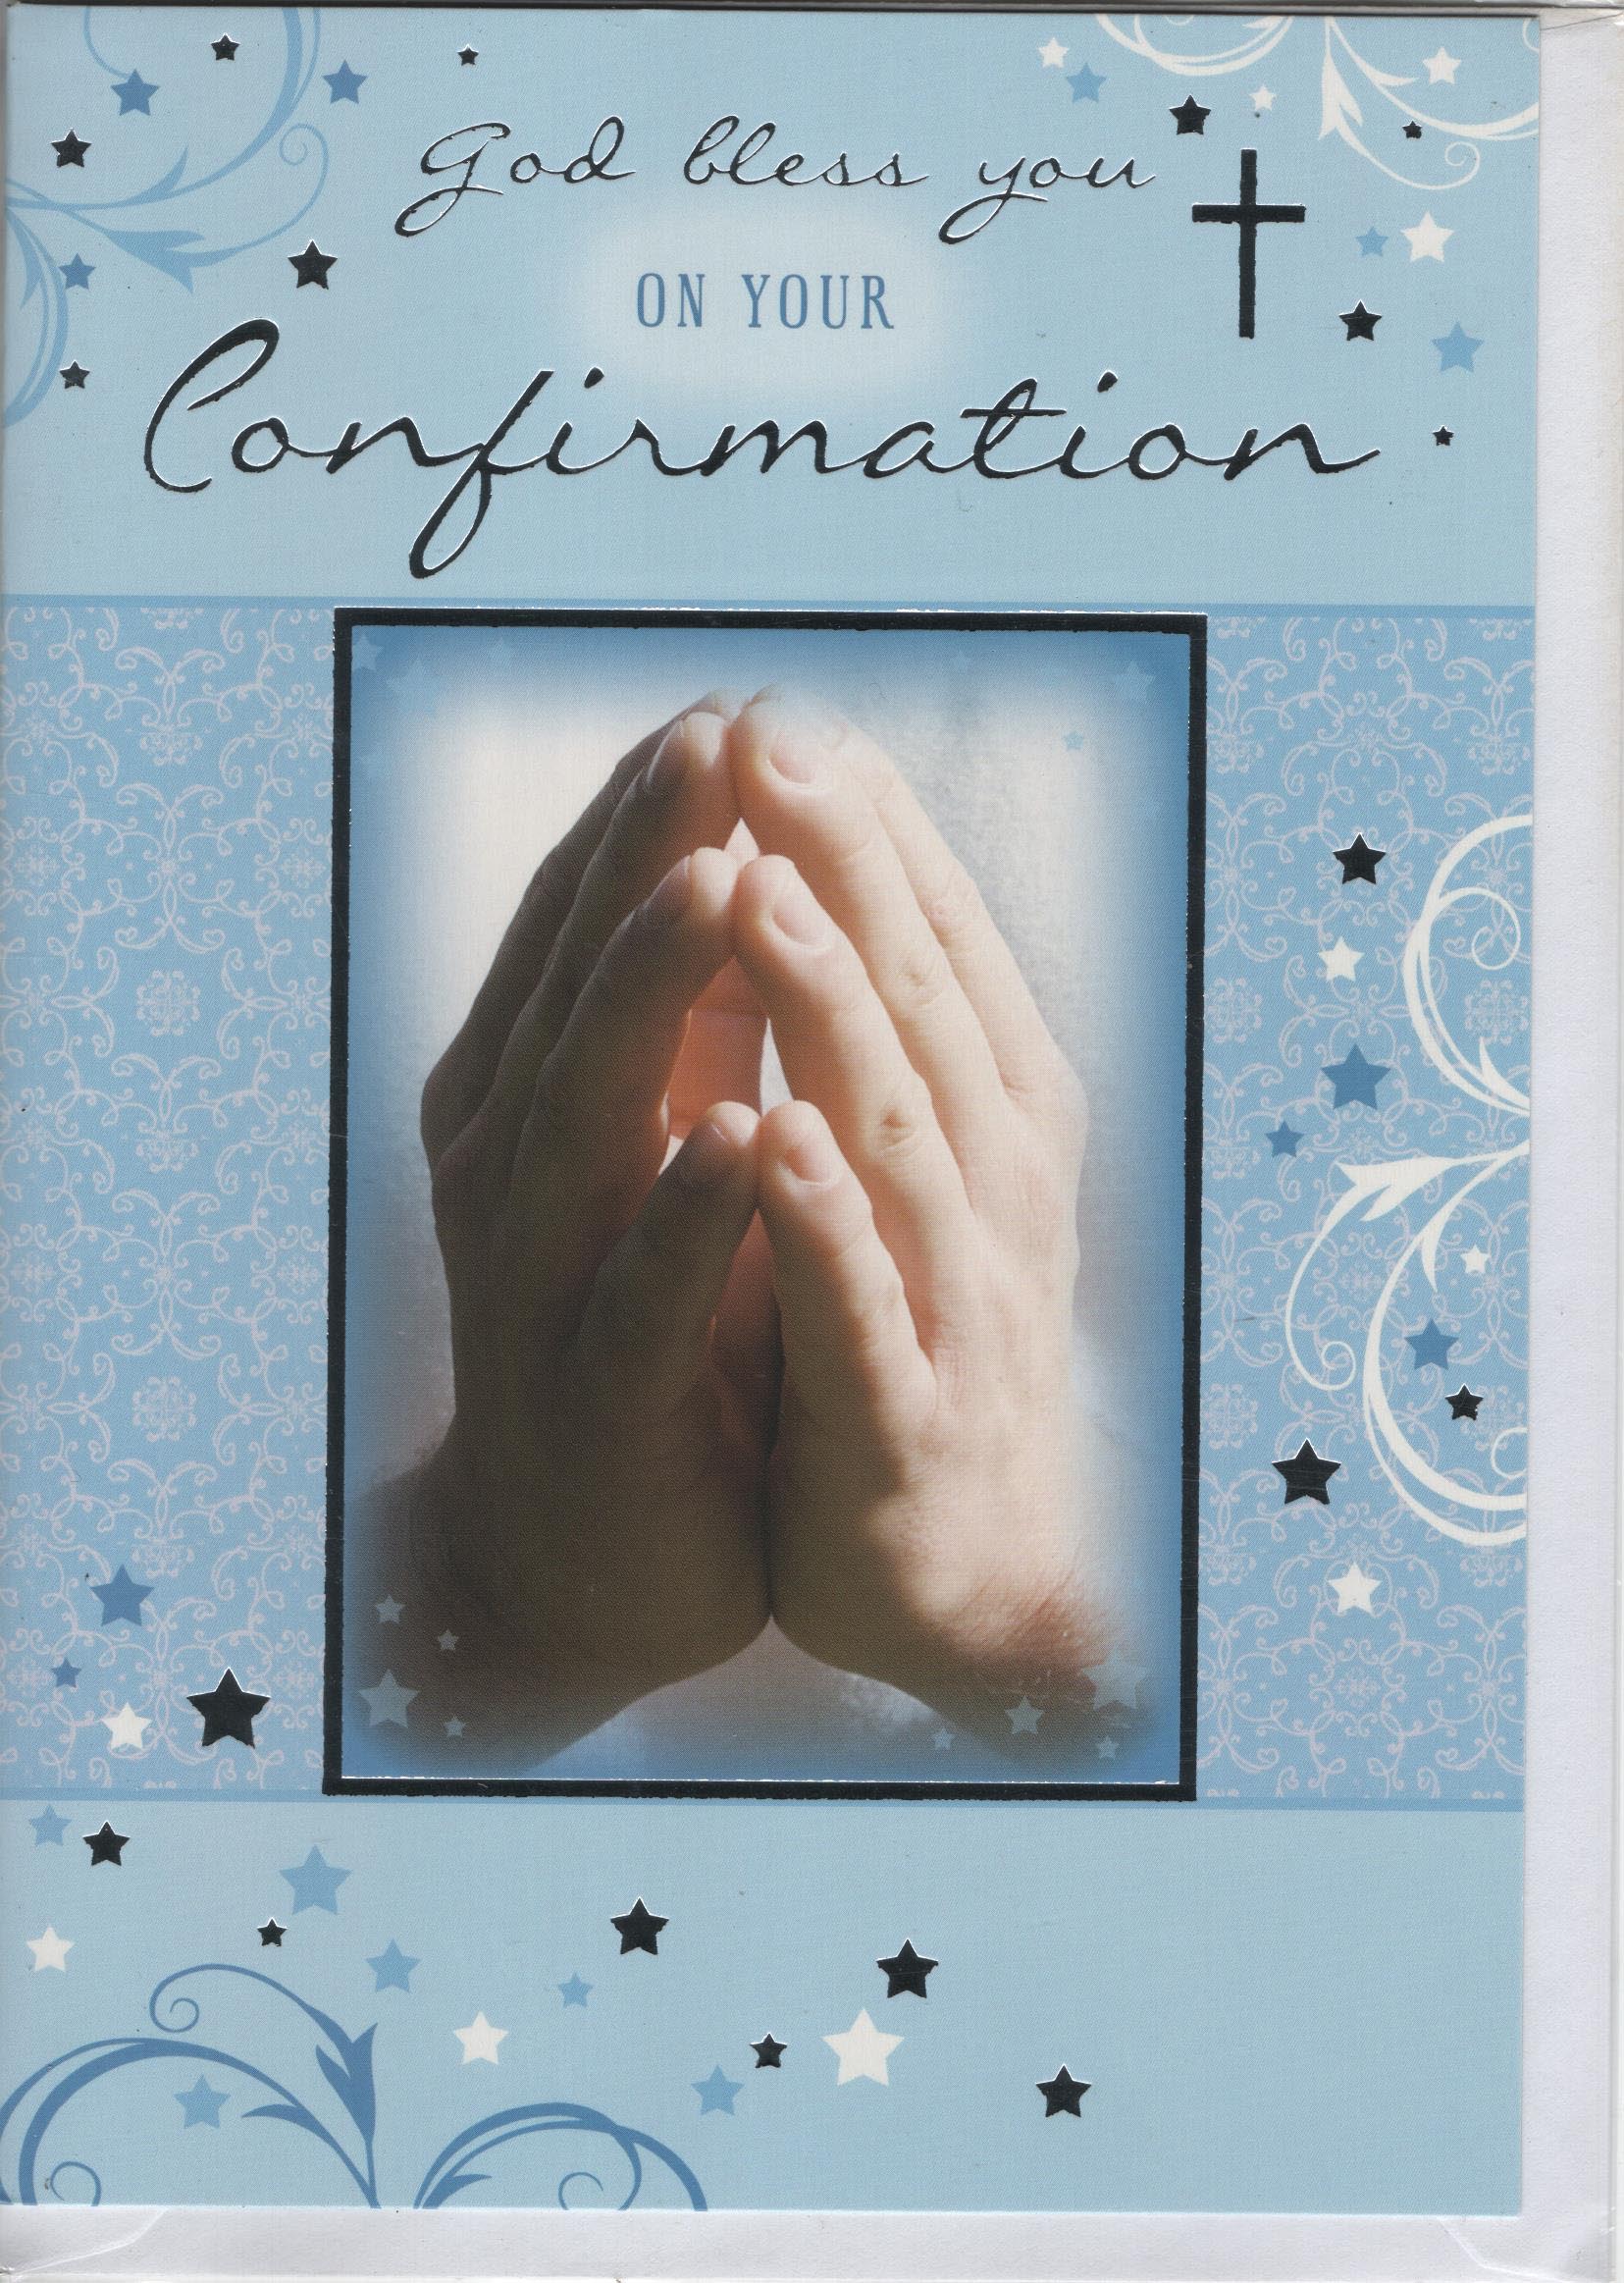 God Bless You on Your Confirmation Greeting Card